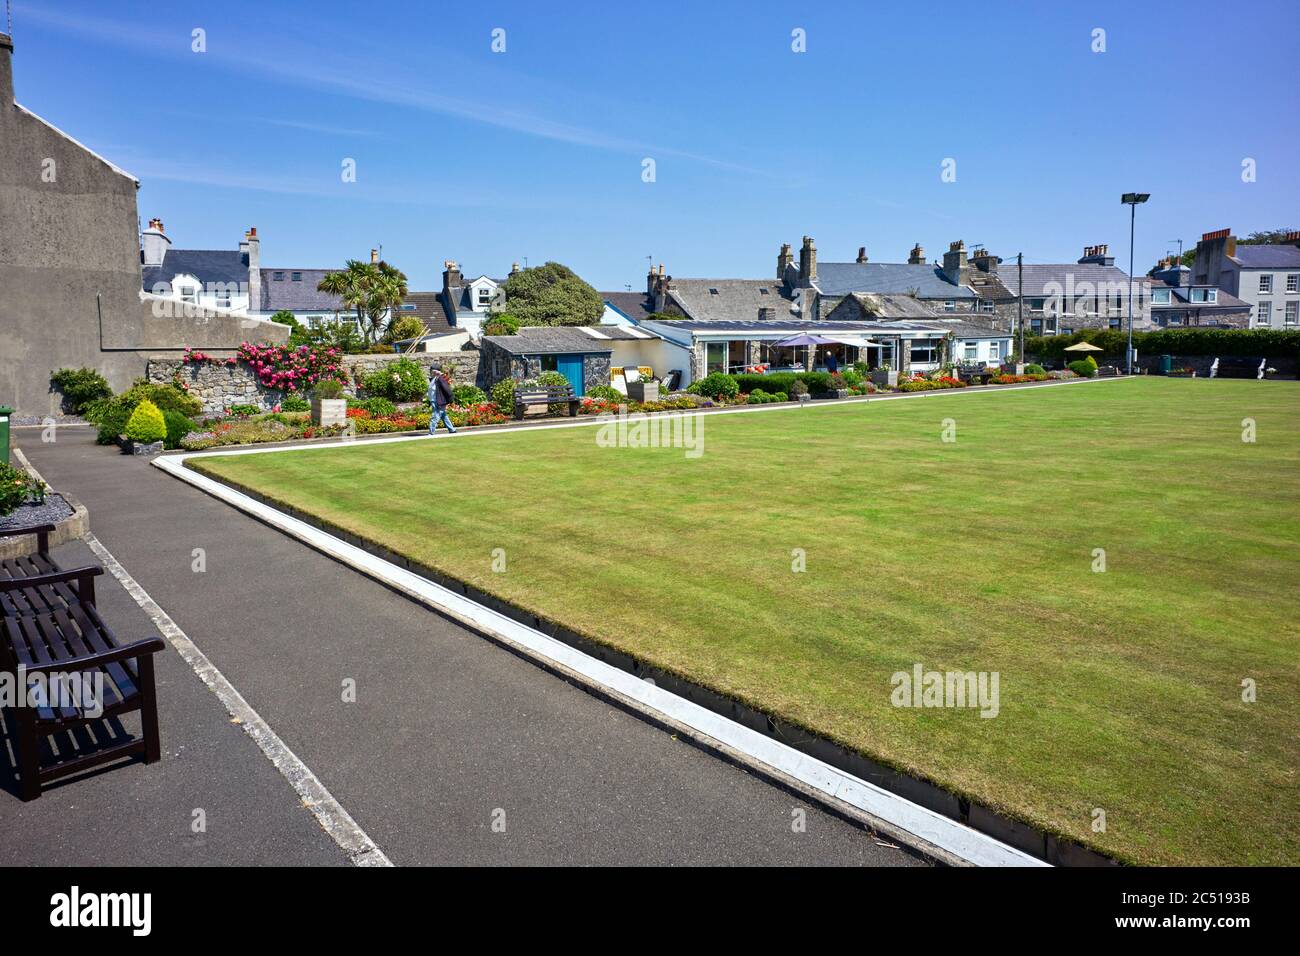 The bowling green and cafe at Castletown, Isle of Man Stock Photo